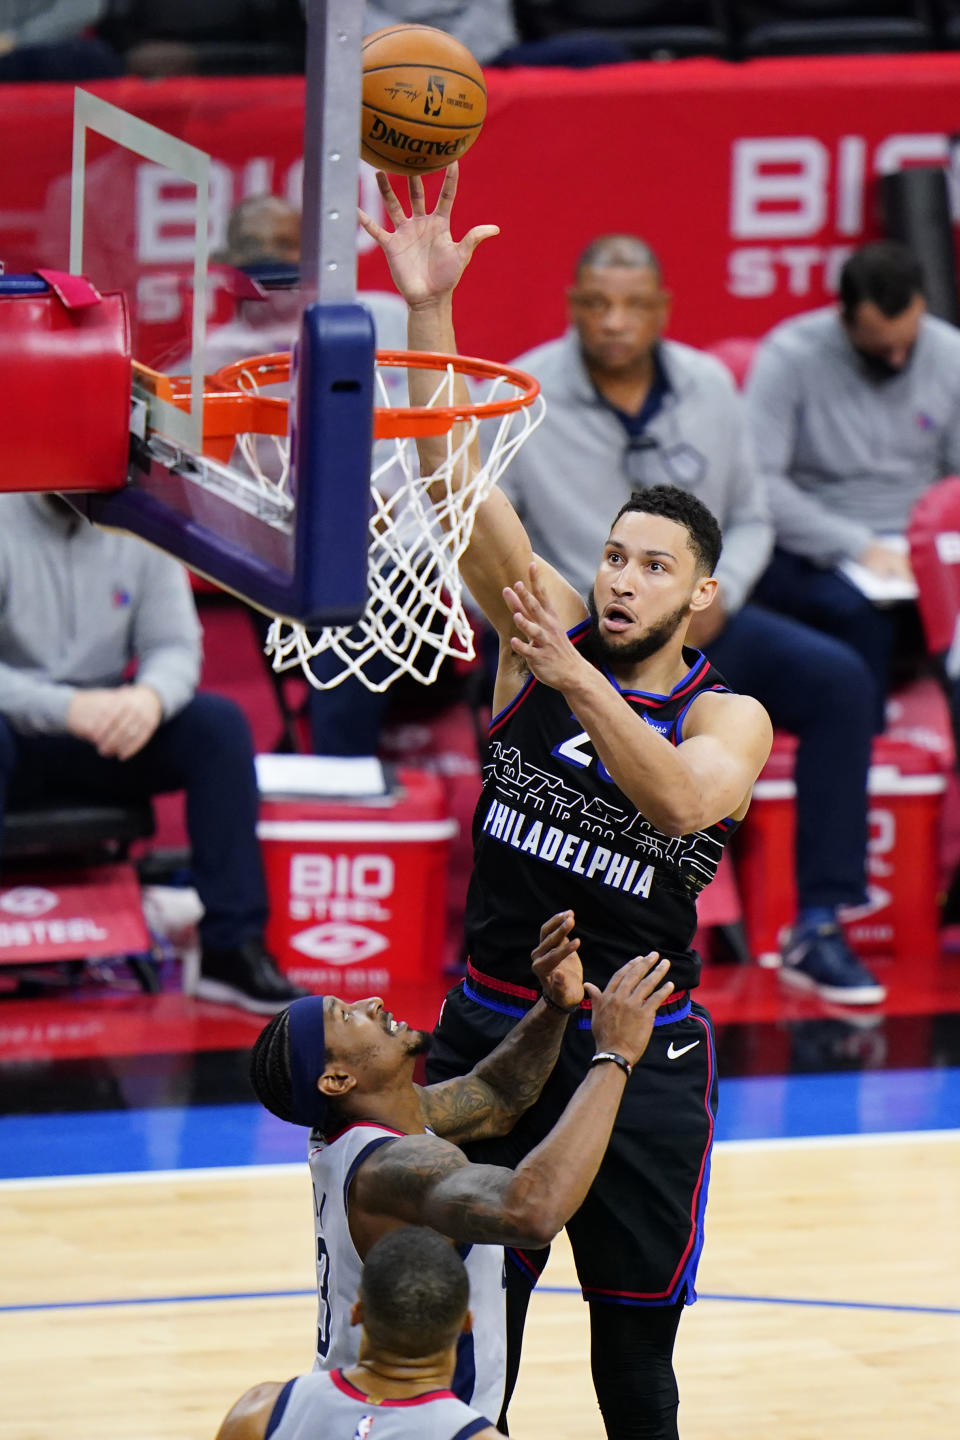 Philadelphia 76ers' Ben Simmons, right, goes up for a shot against Washington Wizards' Bradley Beal during the first half of Game 2 in a first-round NBA basketball playoff series, Wednesday, May 26, 2021, in Philadelphia. Ben Simmons can't shoot and lost his confidence. He blamed a mental block on the worst free-throw shooting percentage in NBA playoff history. The 76ers head into the offseason faced with a big question - do they try and salvage Simmons or deal the former No. 1 pick. (AP Photo/Matt Slocum)